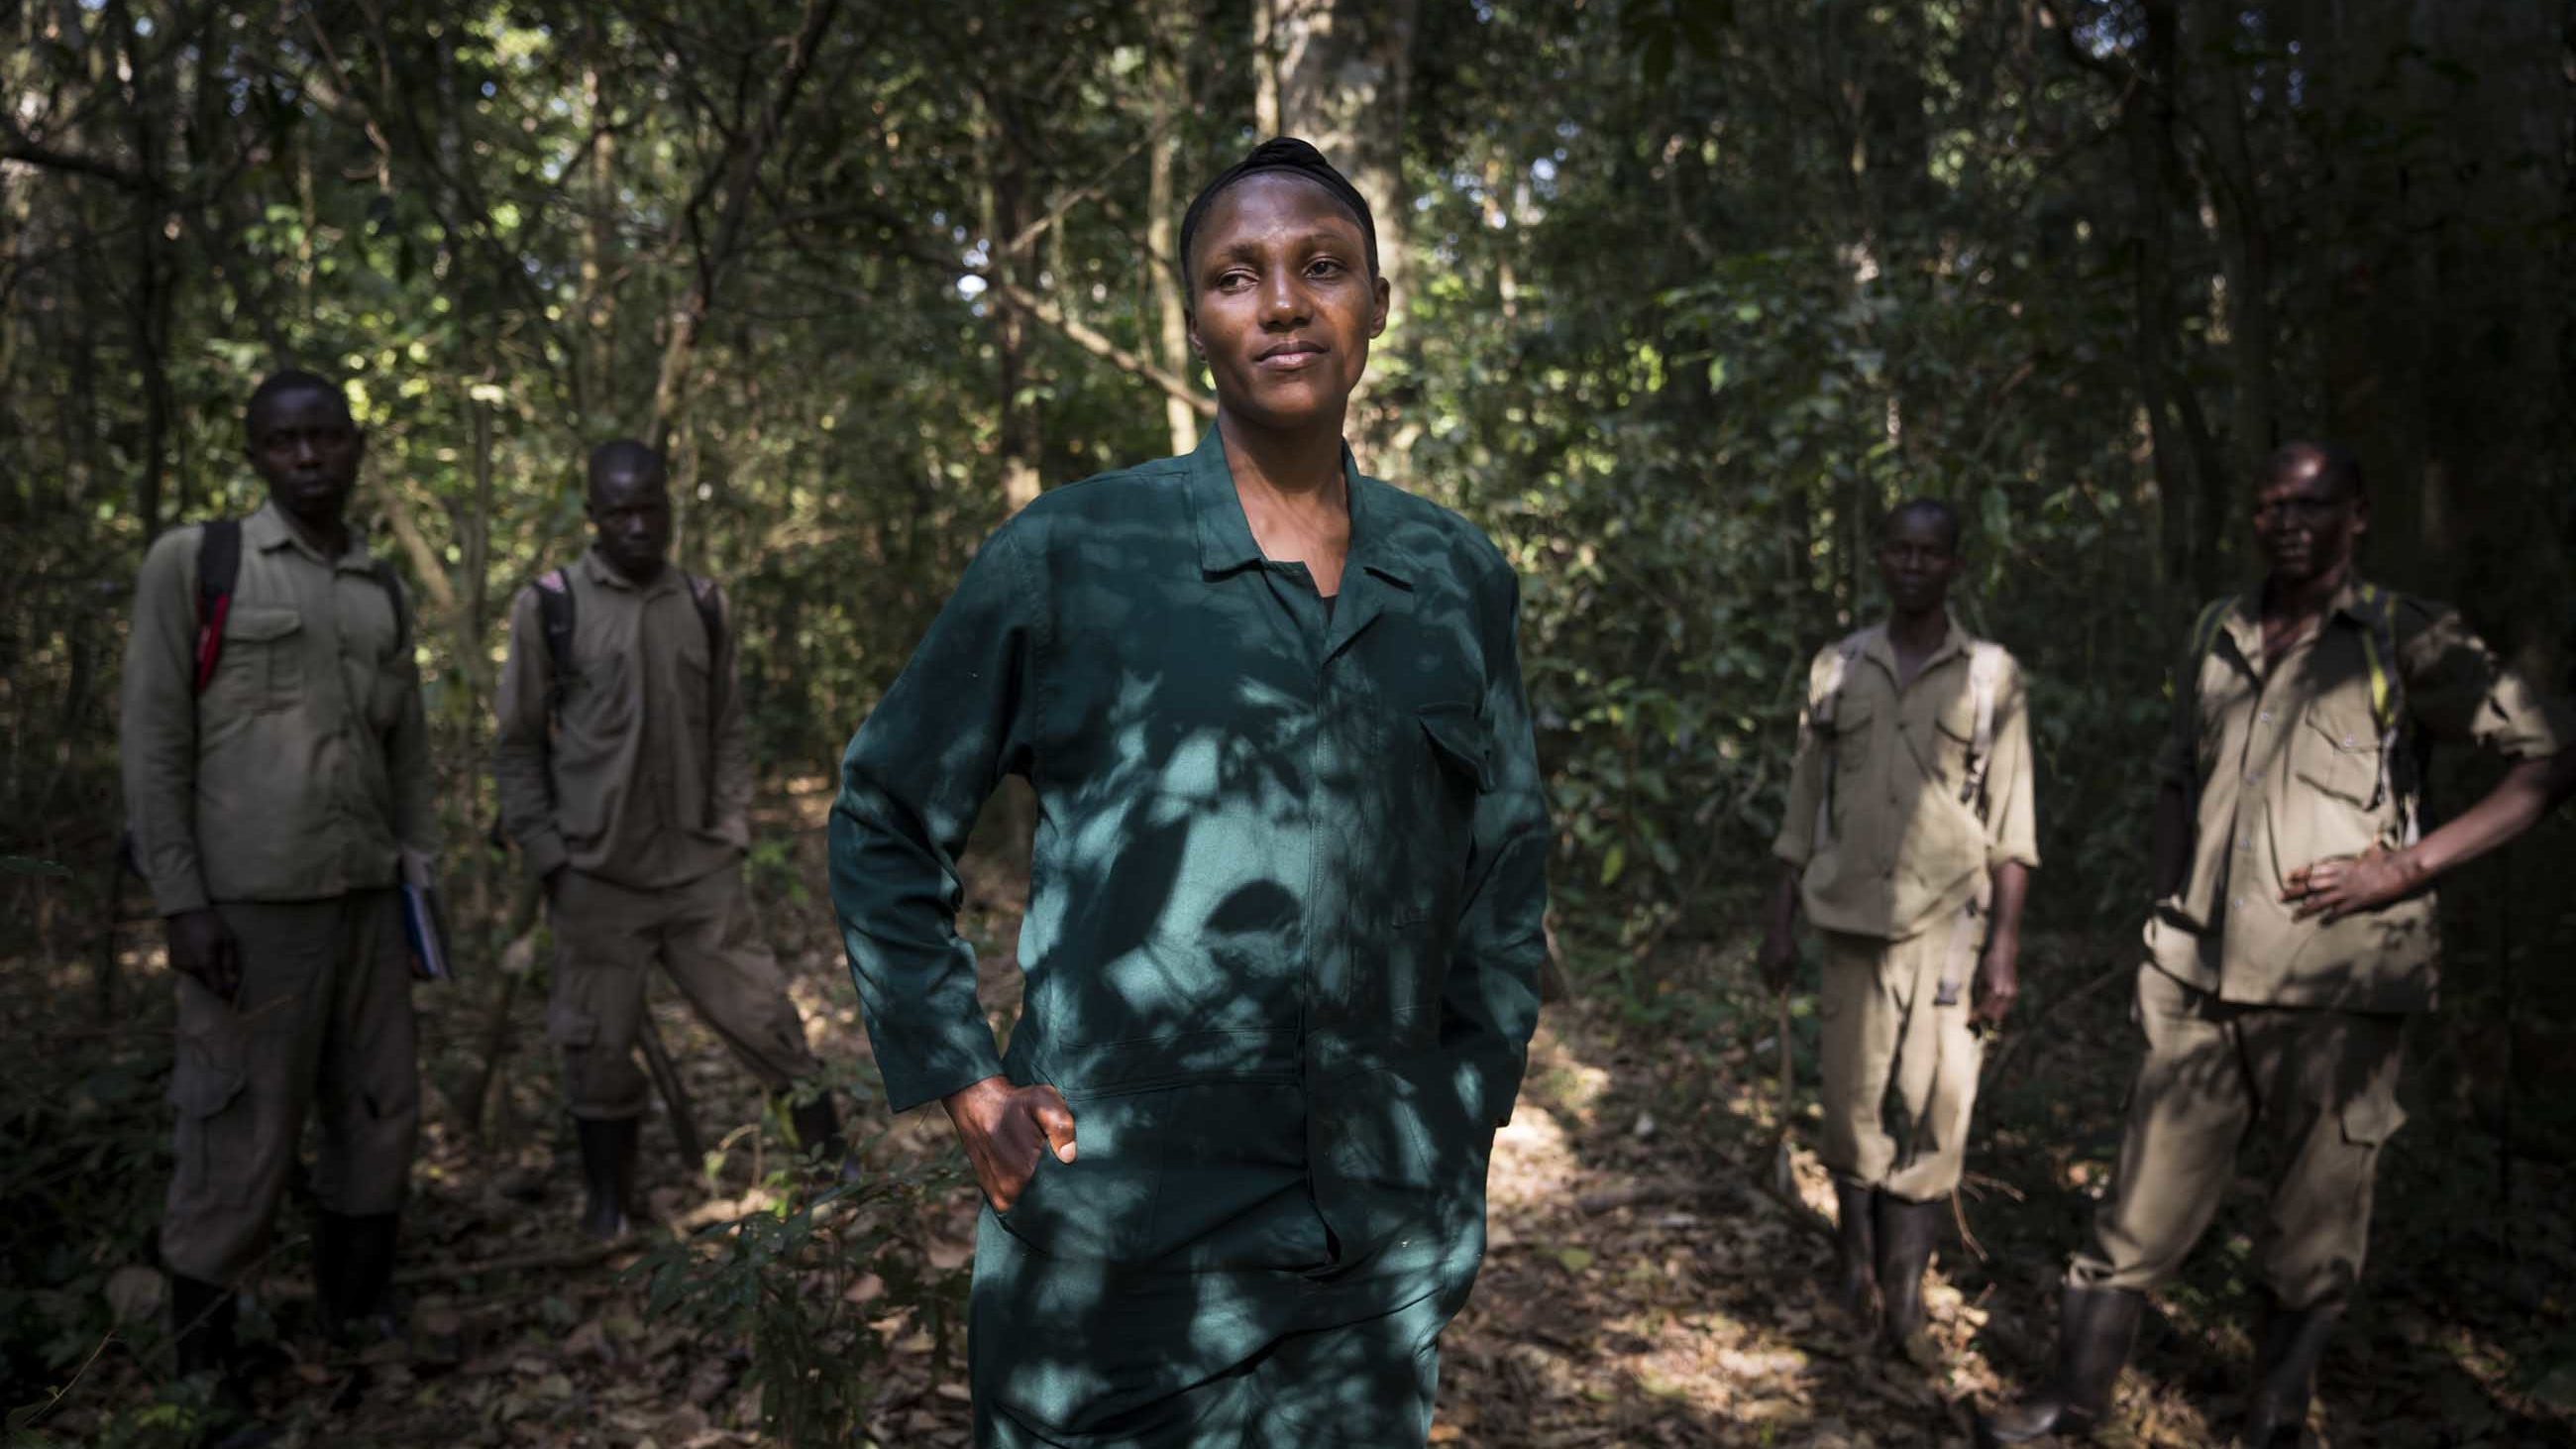 Caroline Asiimwe is a veterinarian with the Budongo Conservation Field Station in Uganda. She leads a group of former wildlife poachers who now act as conservation rangers in a park that faces numerous stressors.